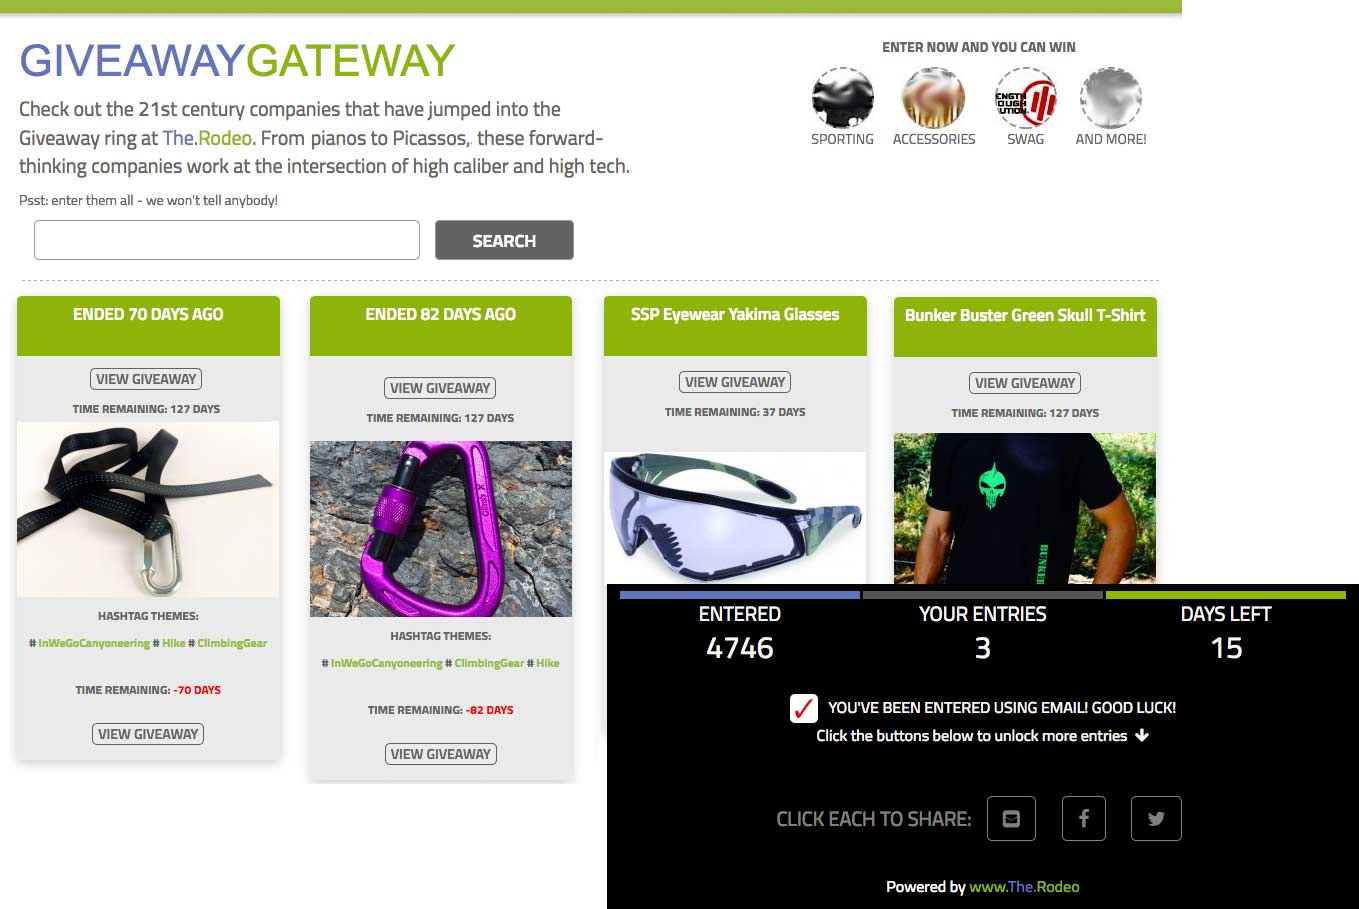 www.The.Rodeo's Giveaway Gateway Platform: The.Rodeo's display networks extends your brand's reach